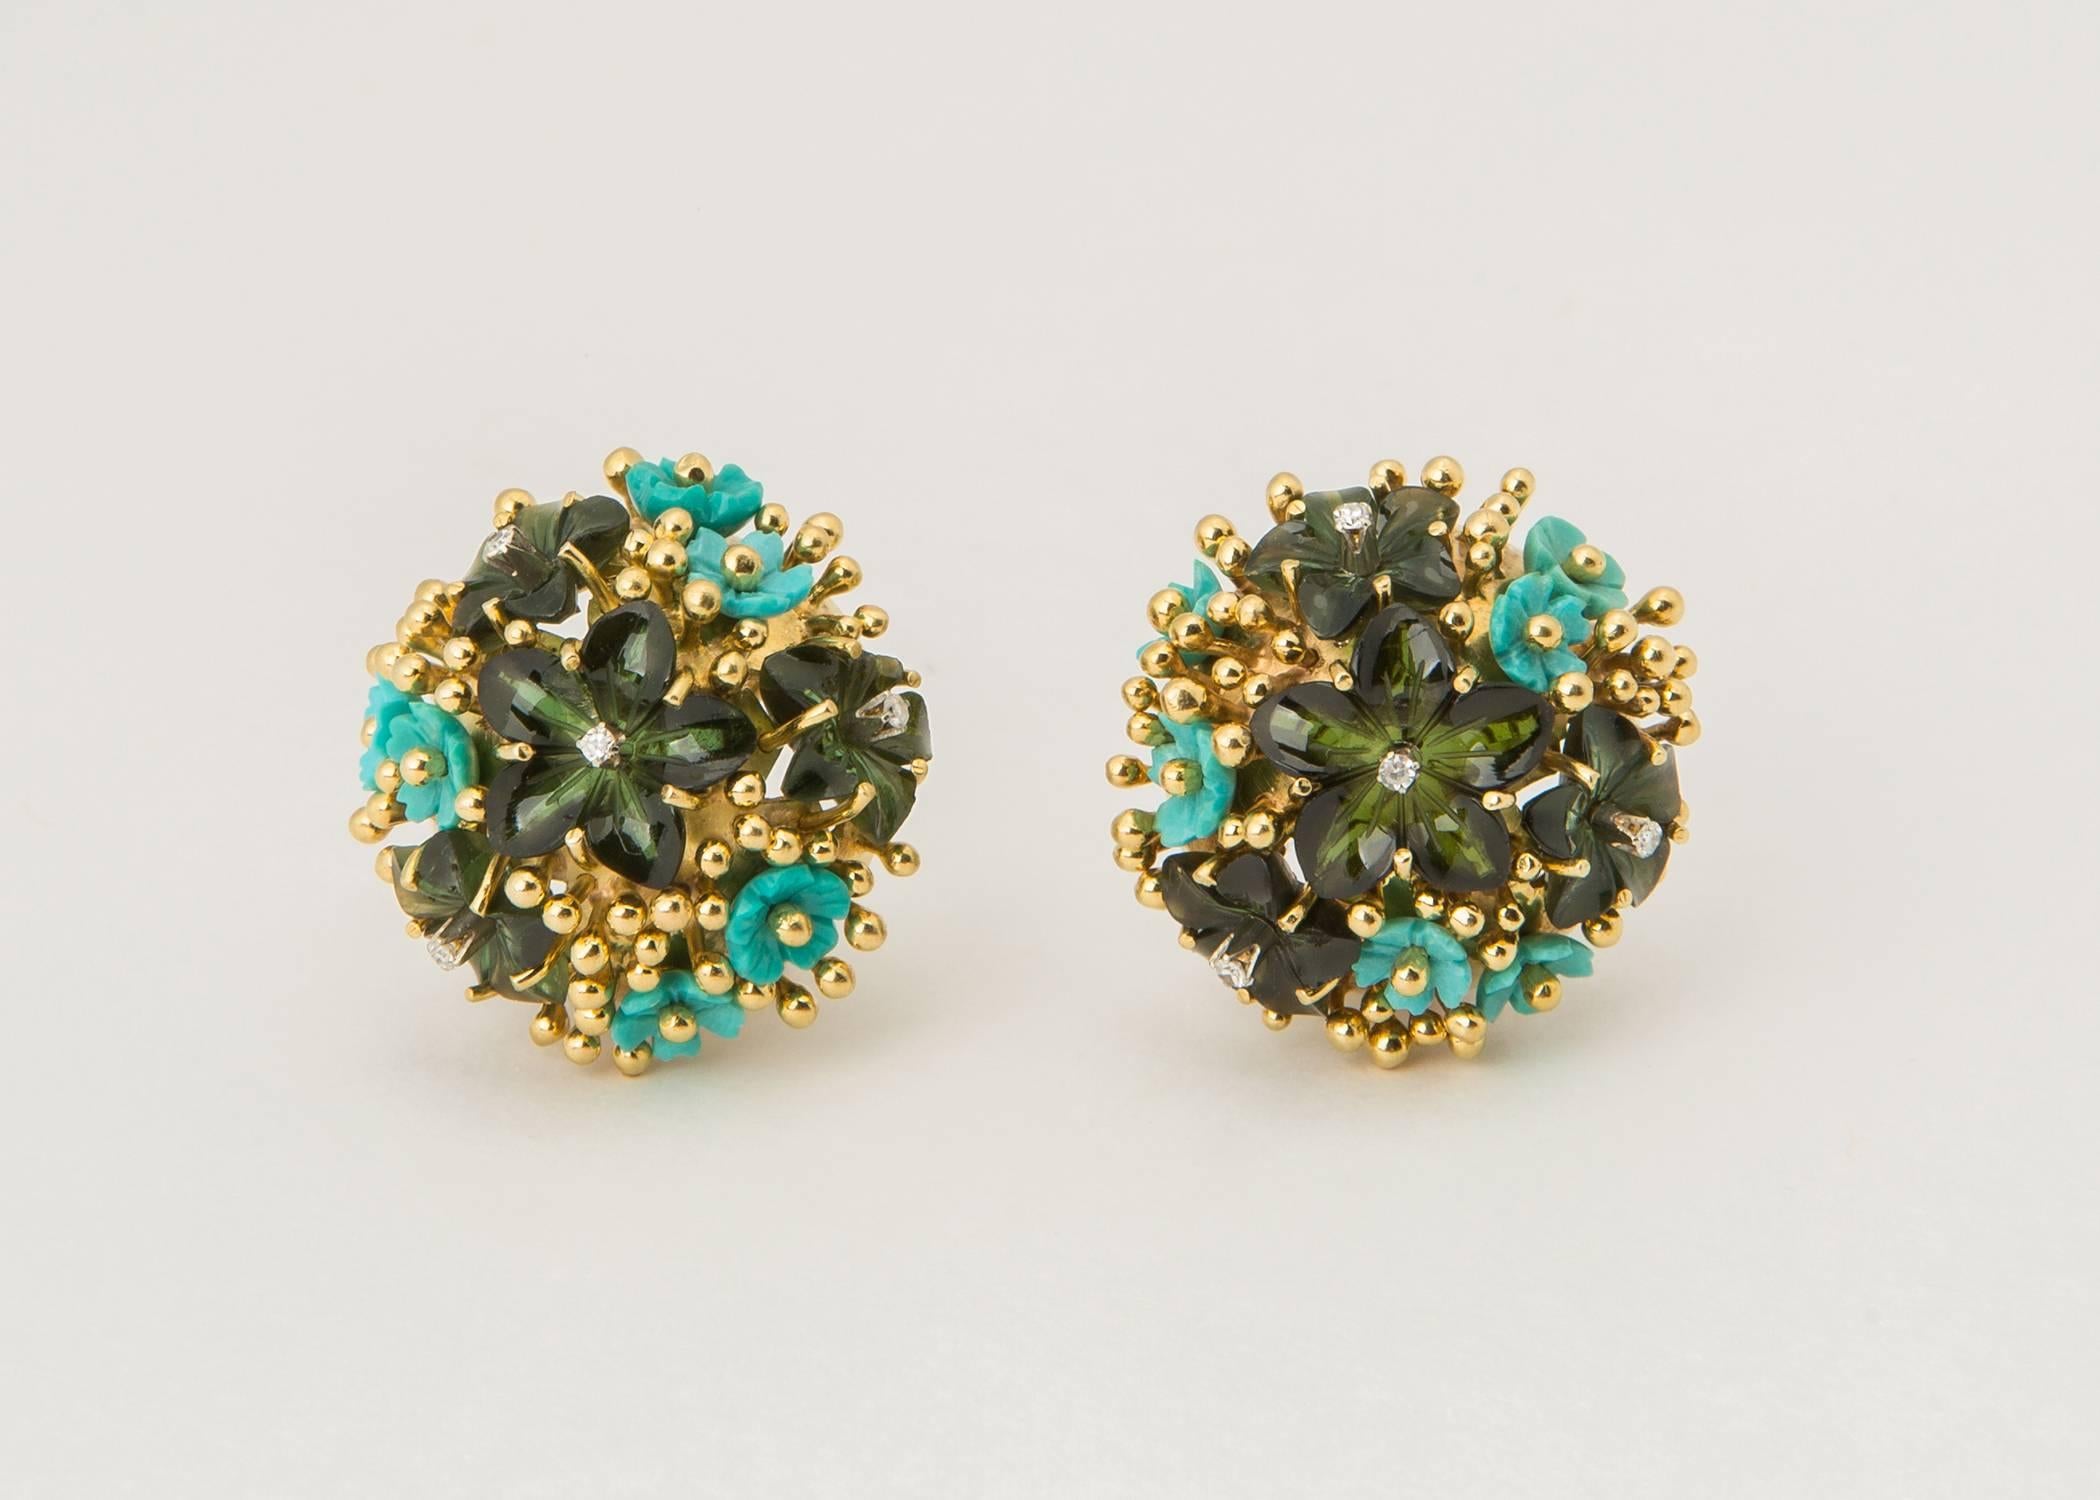 Tiffany & Co. combines carved green tourmaline and turquoise flowers and sets them in a playful field of gold. This is an exceptional example of Tiffany style. Please view second image. 1 inch in size. 